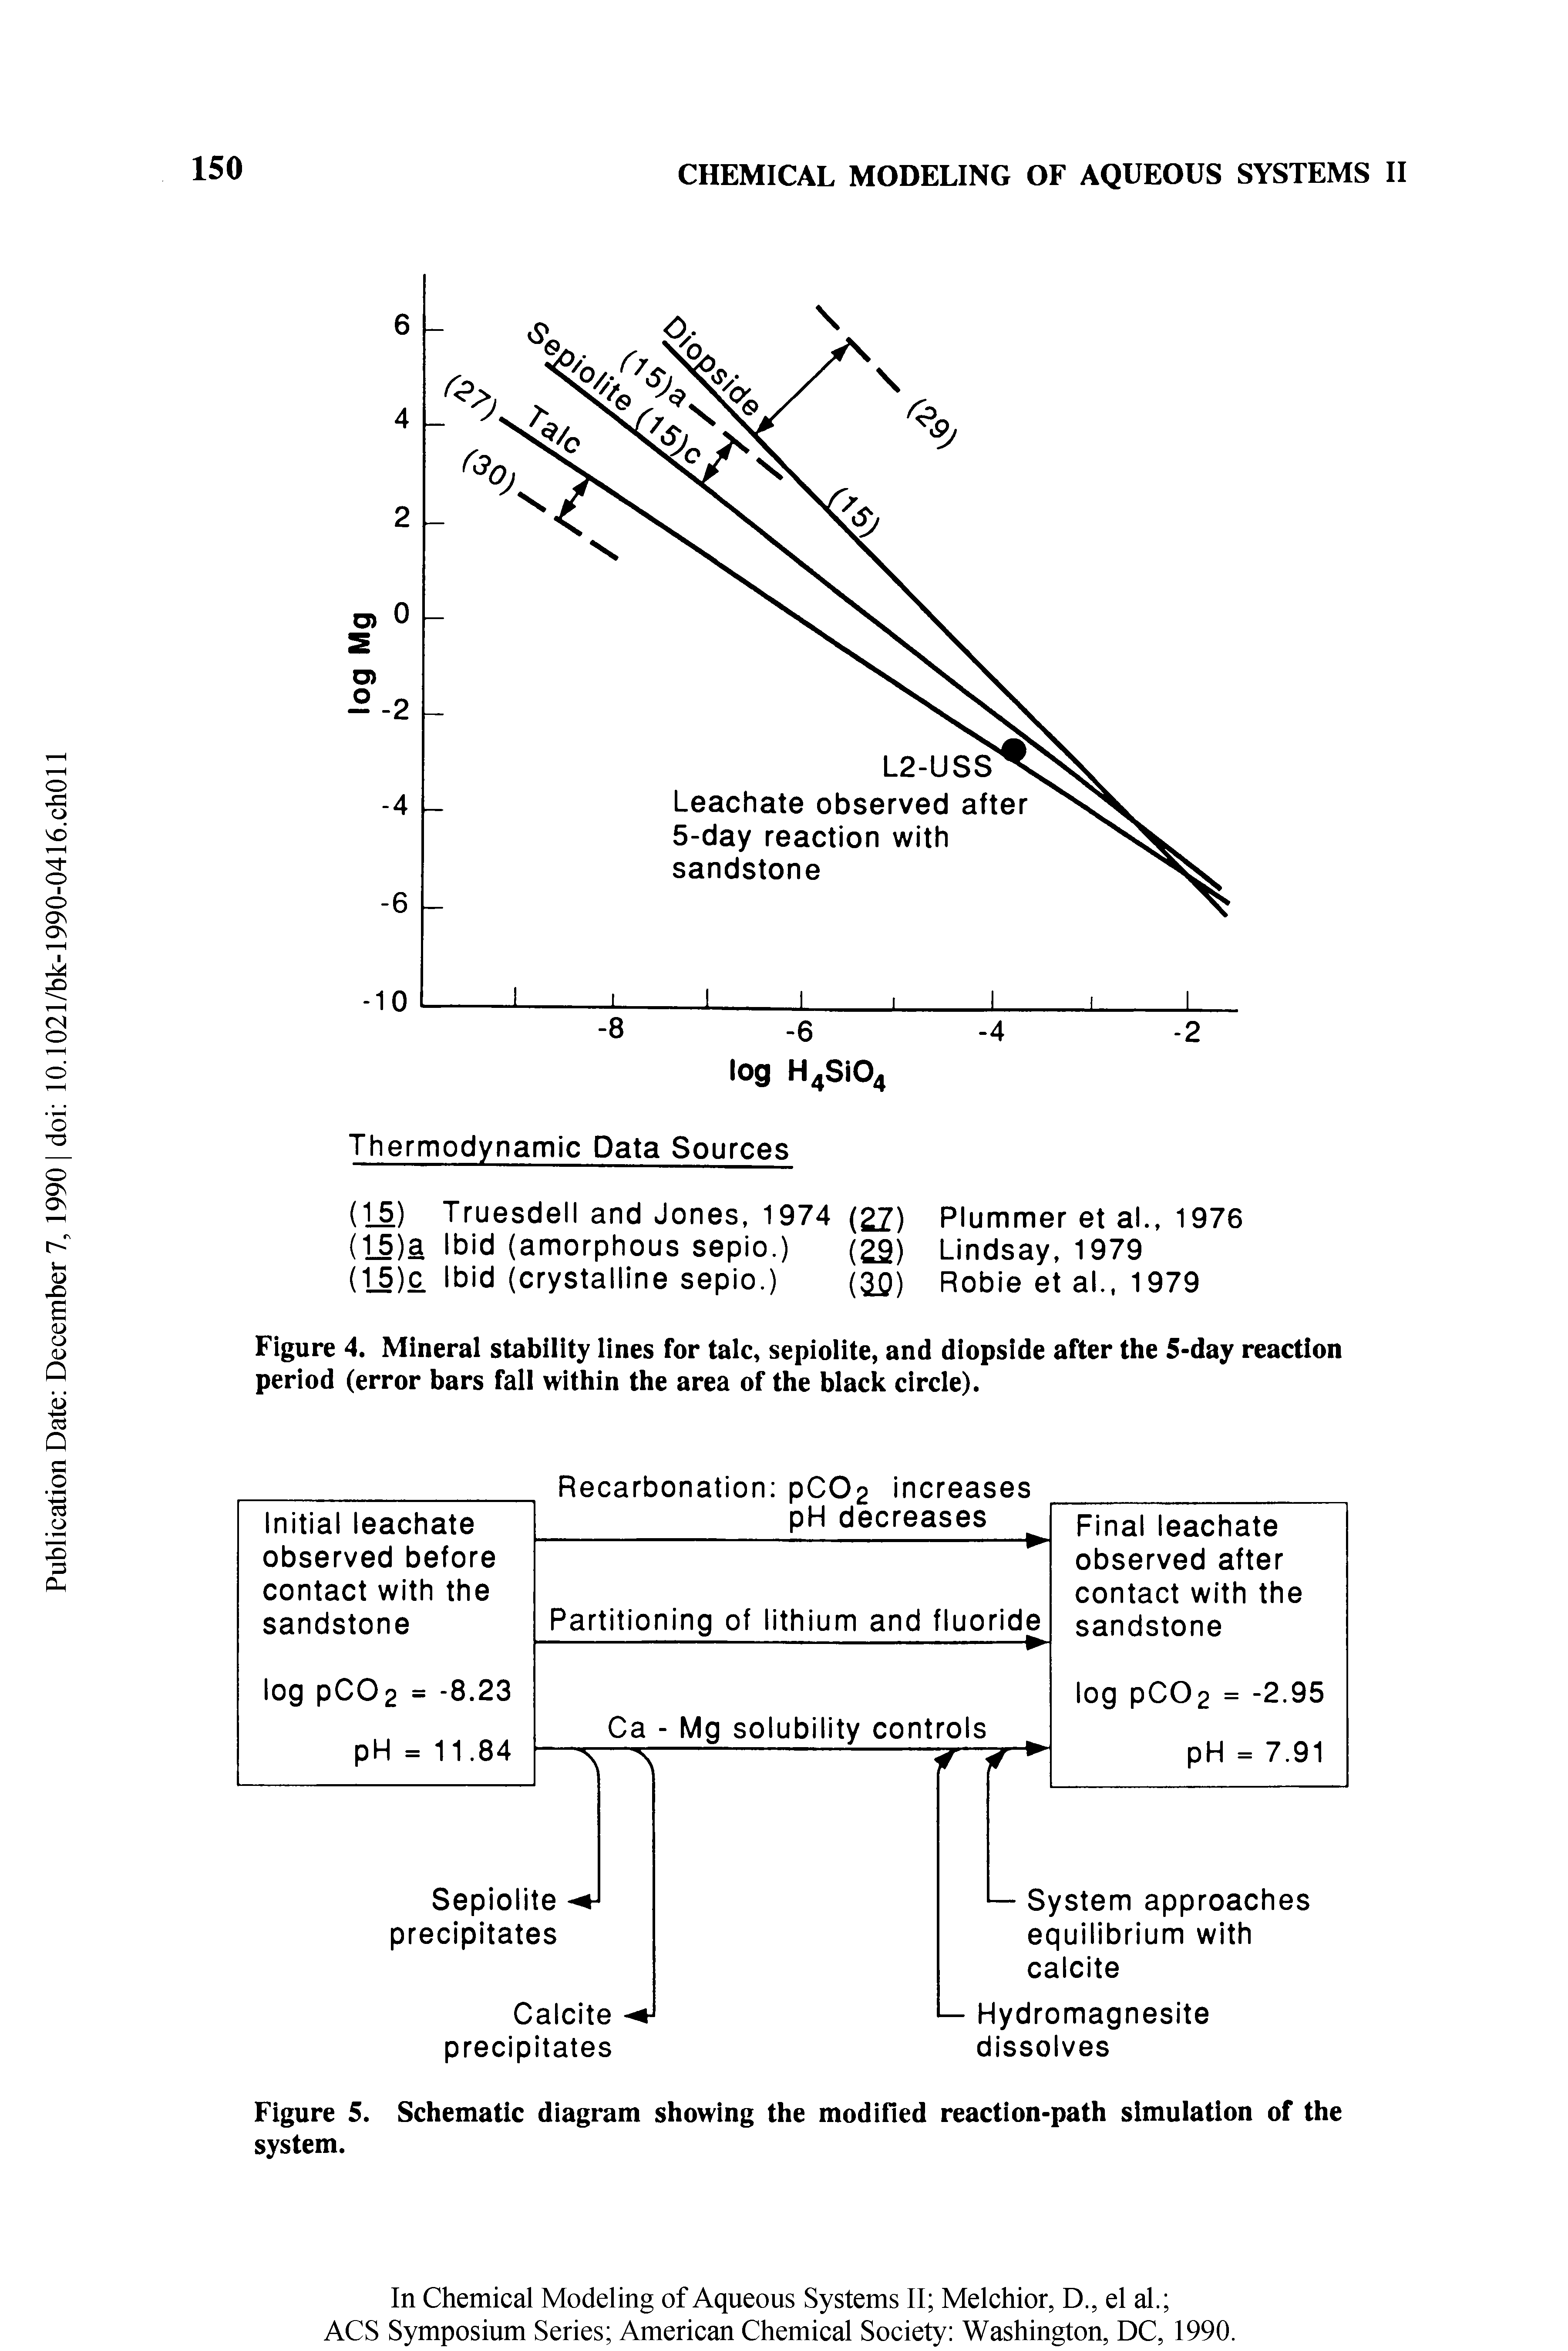 Figure 4. Mineral stability lines for talc, sepiolite, and diopside after the 5-day reaction period (error bars fall within the area of the black circle).